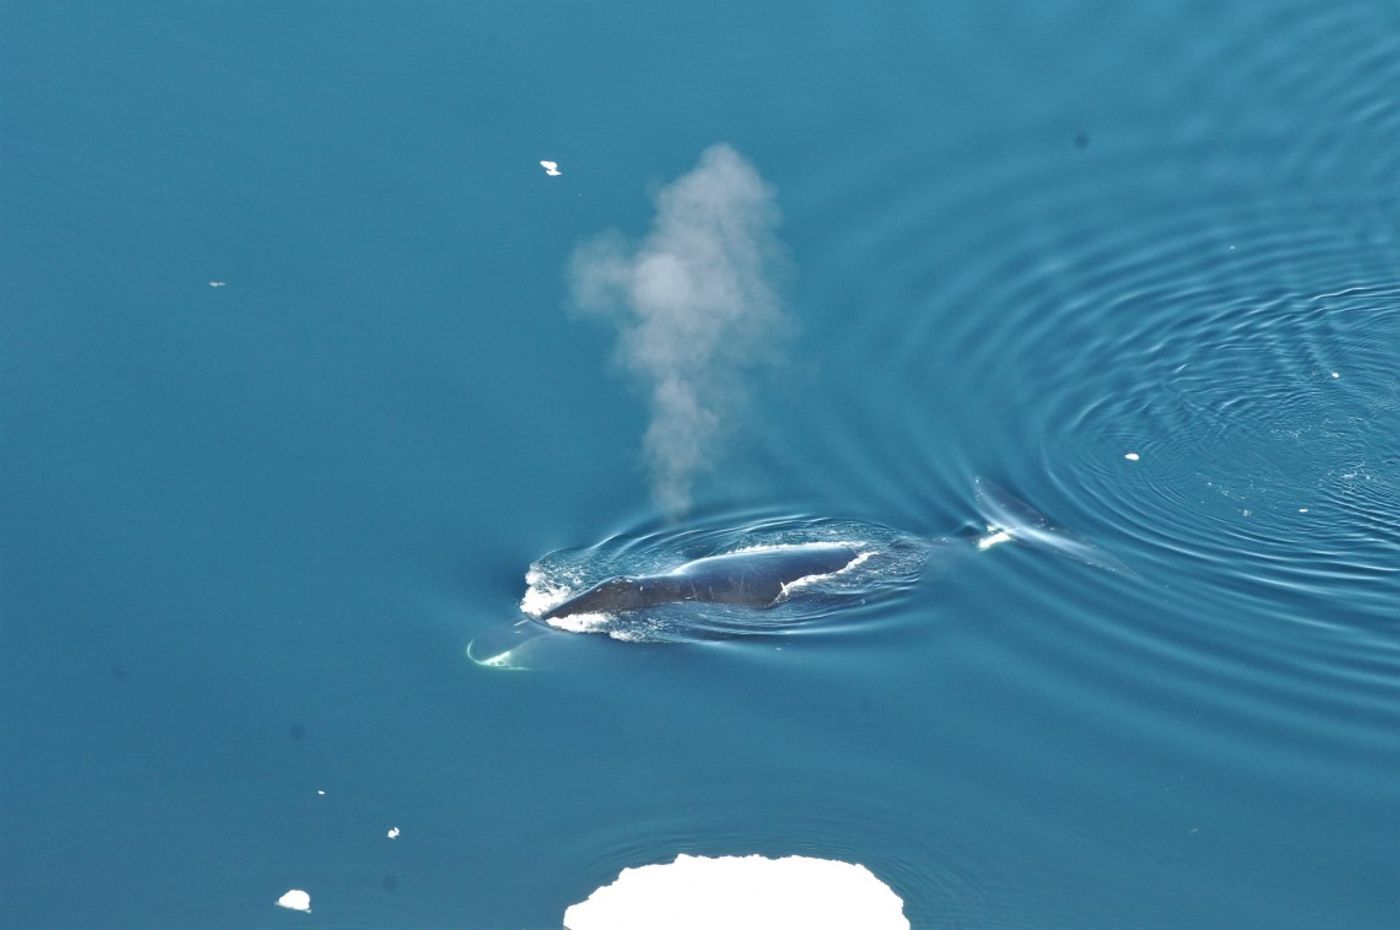 A picture of a bowhead whale surfacing in the ocean.